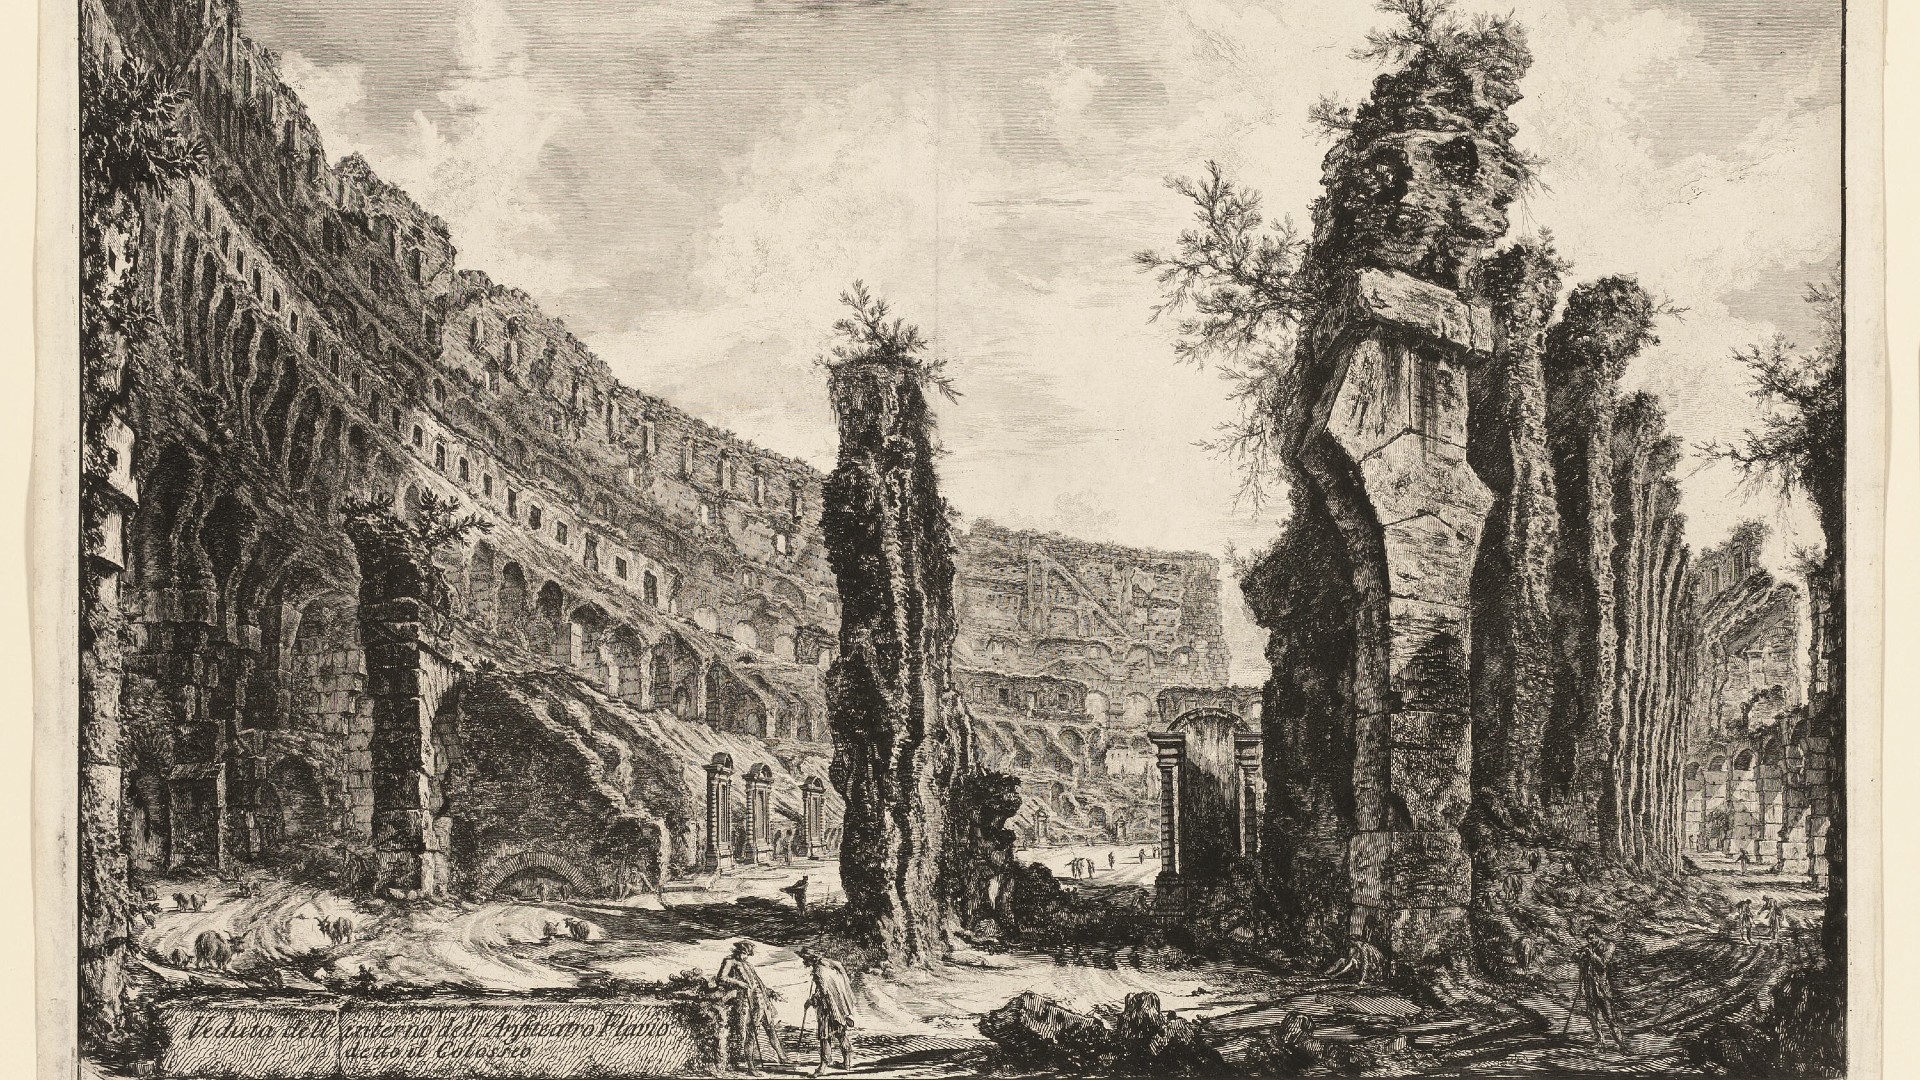 An 18th-century etching of the interior of the Colosseum